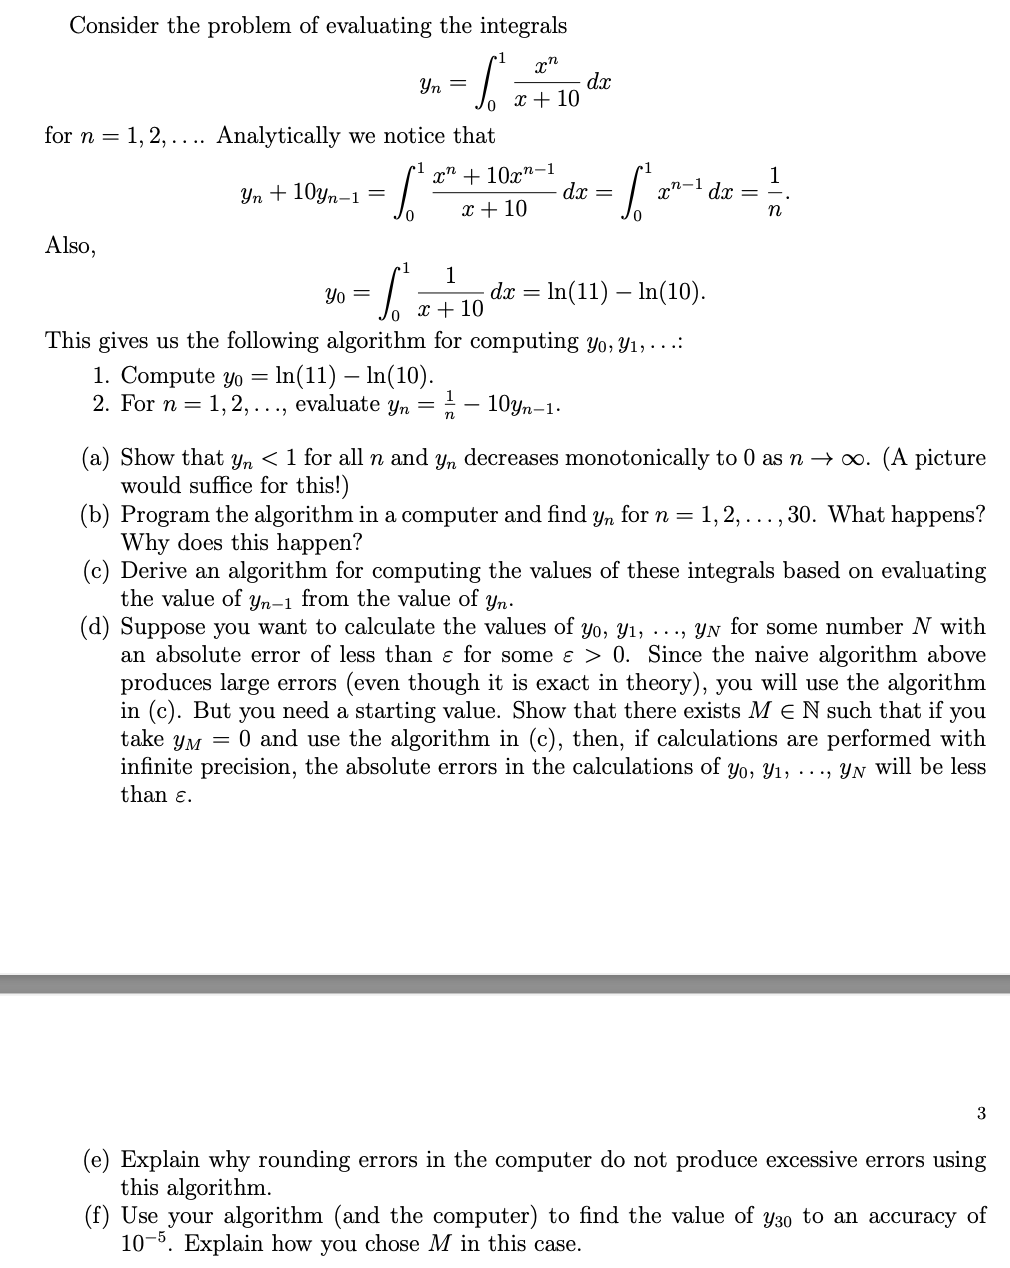 Consider the problem of evaluating the integrals xn S x + 10 for n = 1, 2, .... Analytically we notice that [